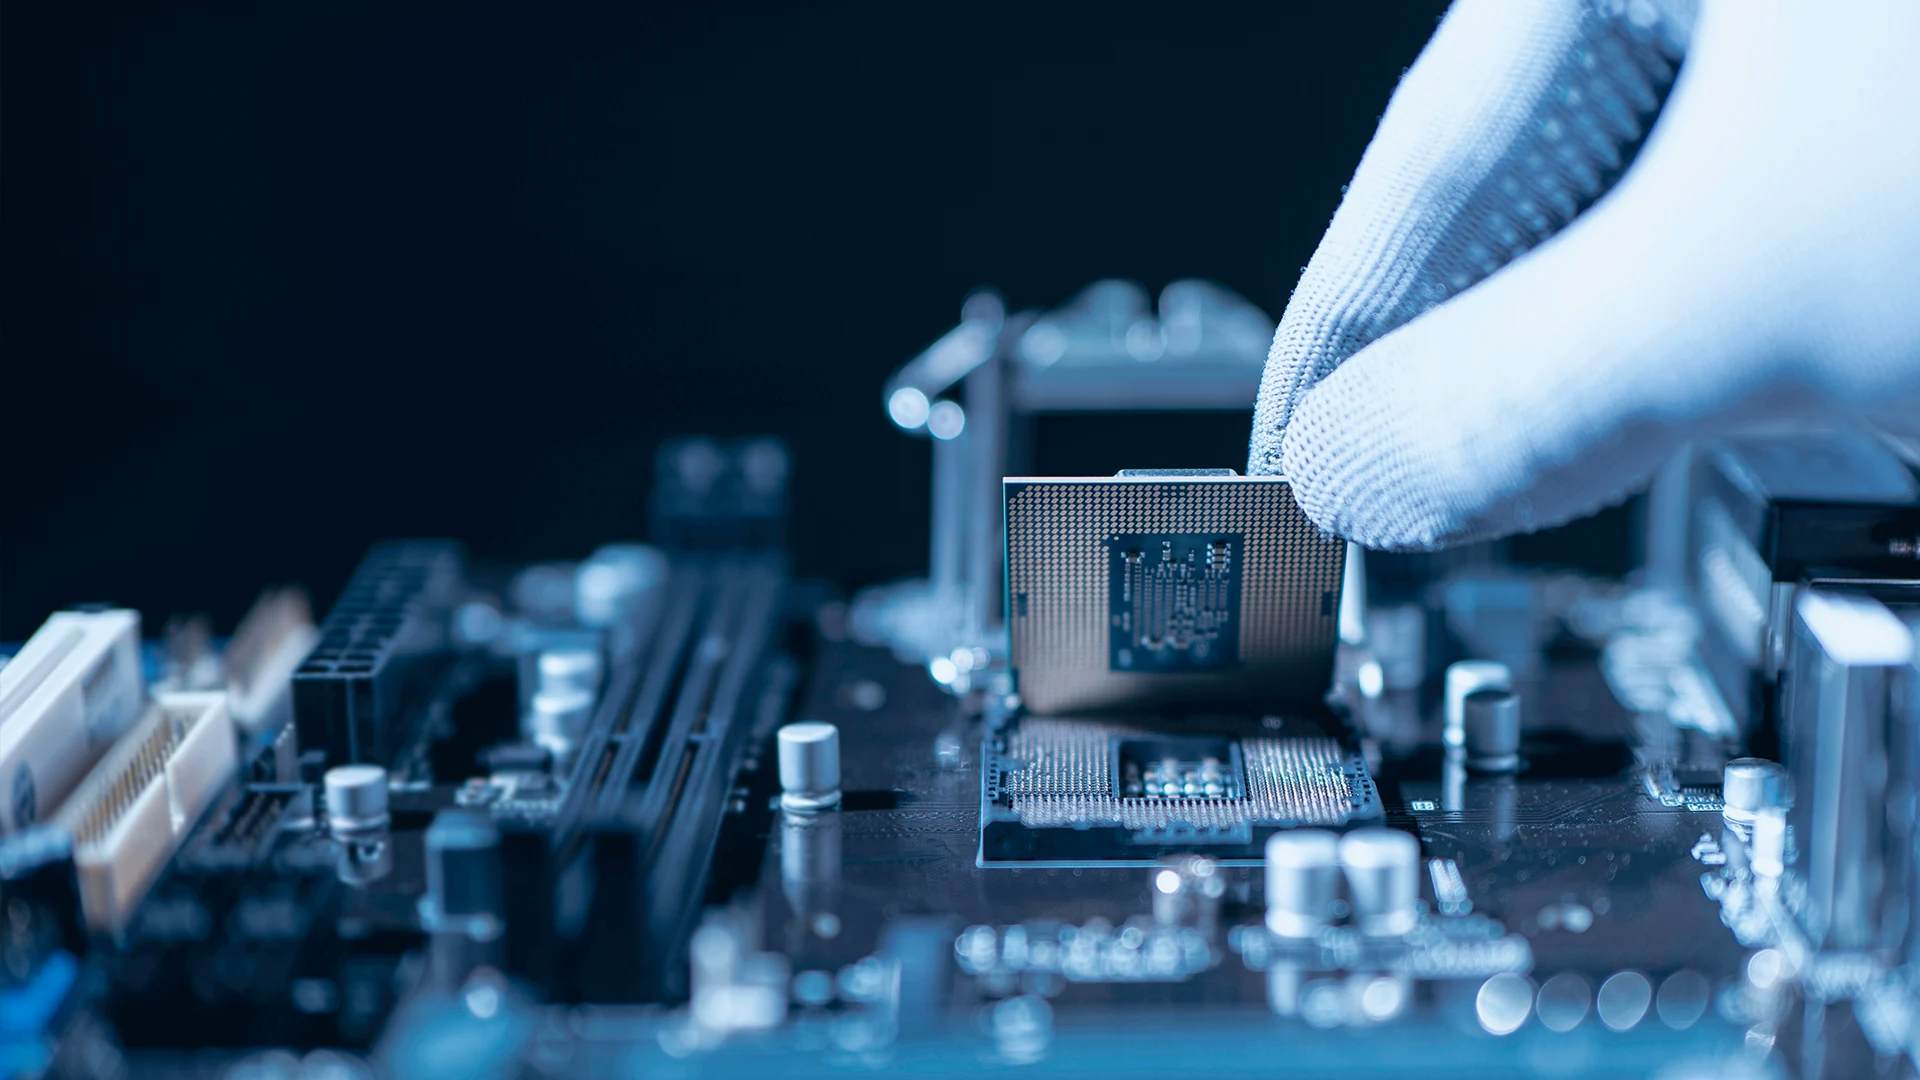 A gloved hand installs a CPU on a motherboard, showcasing technology and precision in electronics assembly.